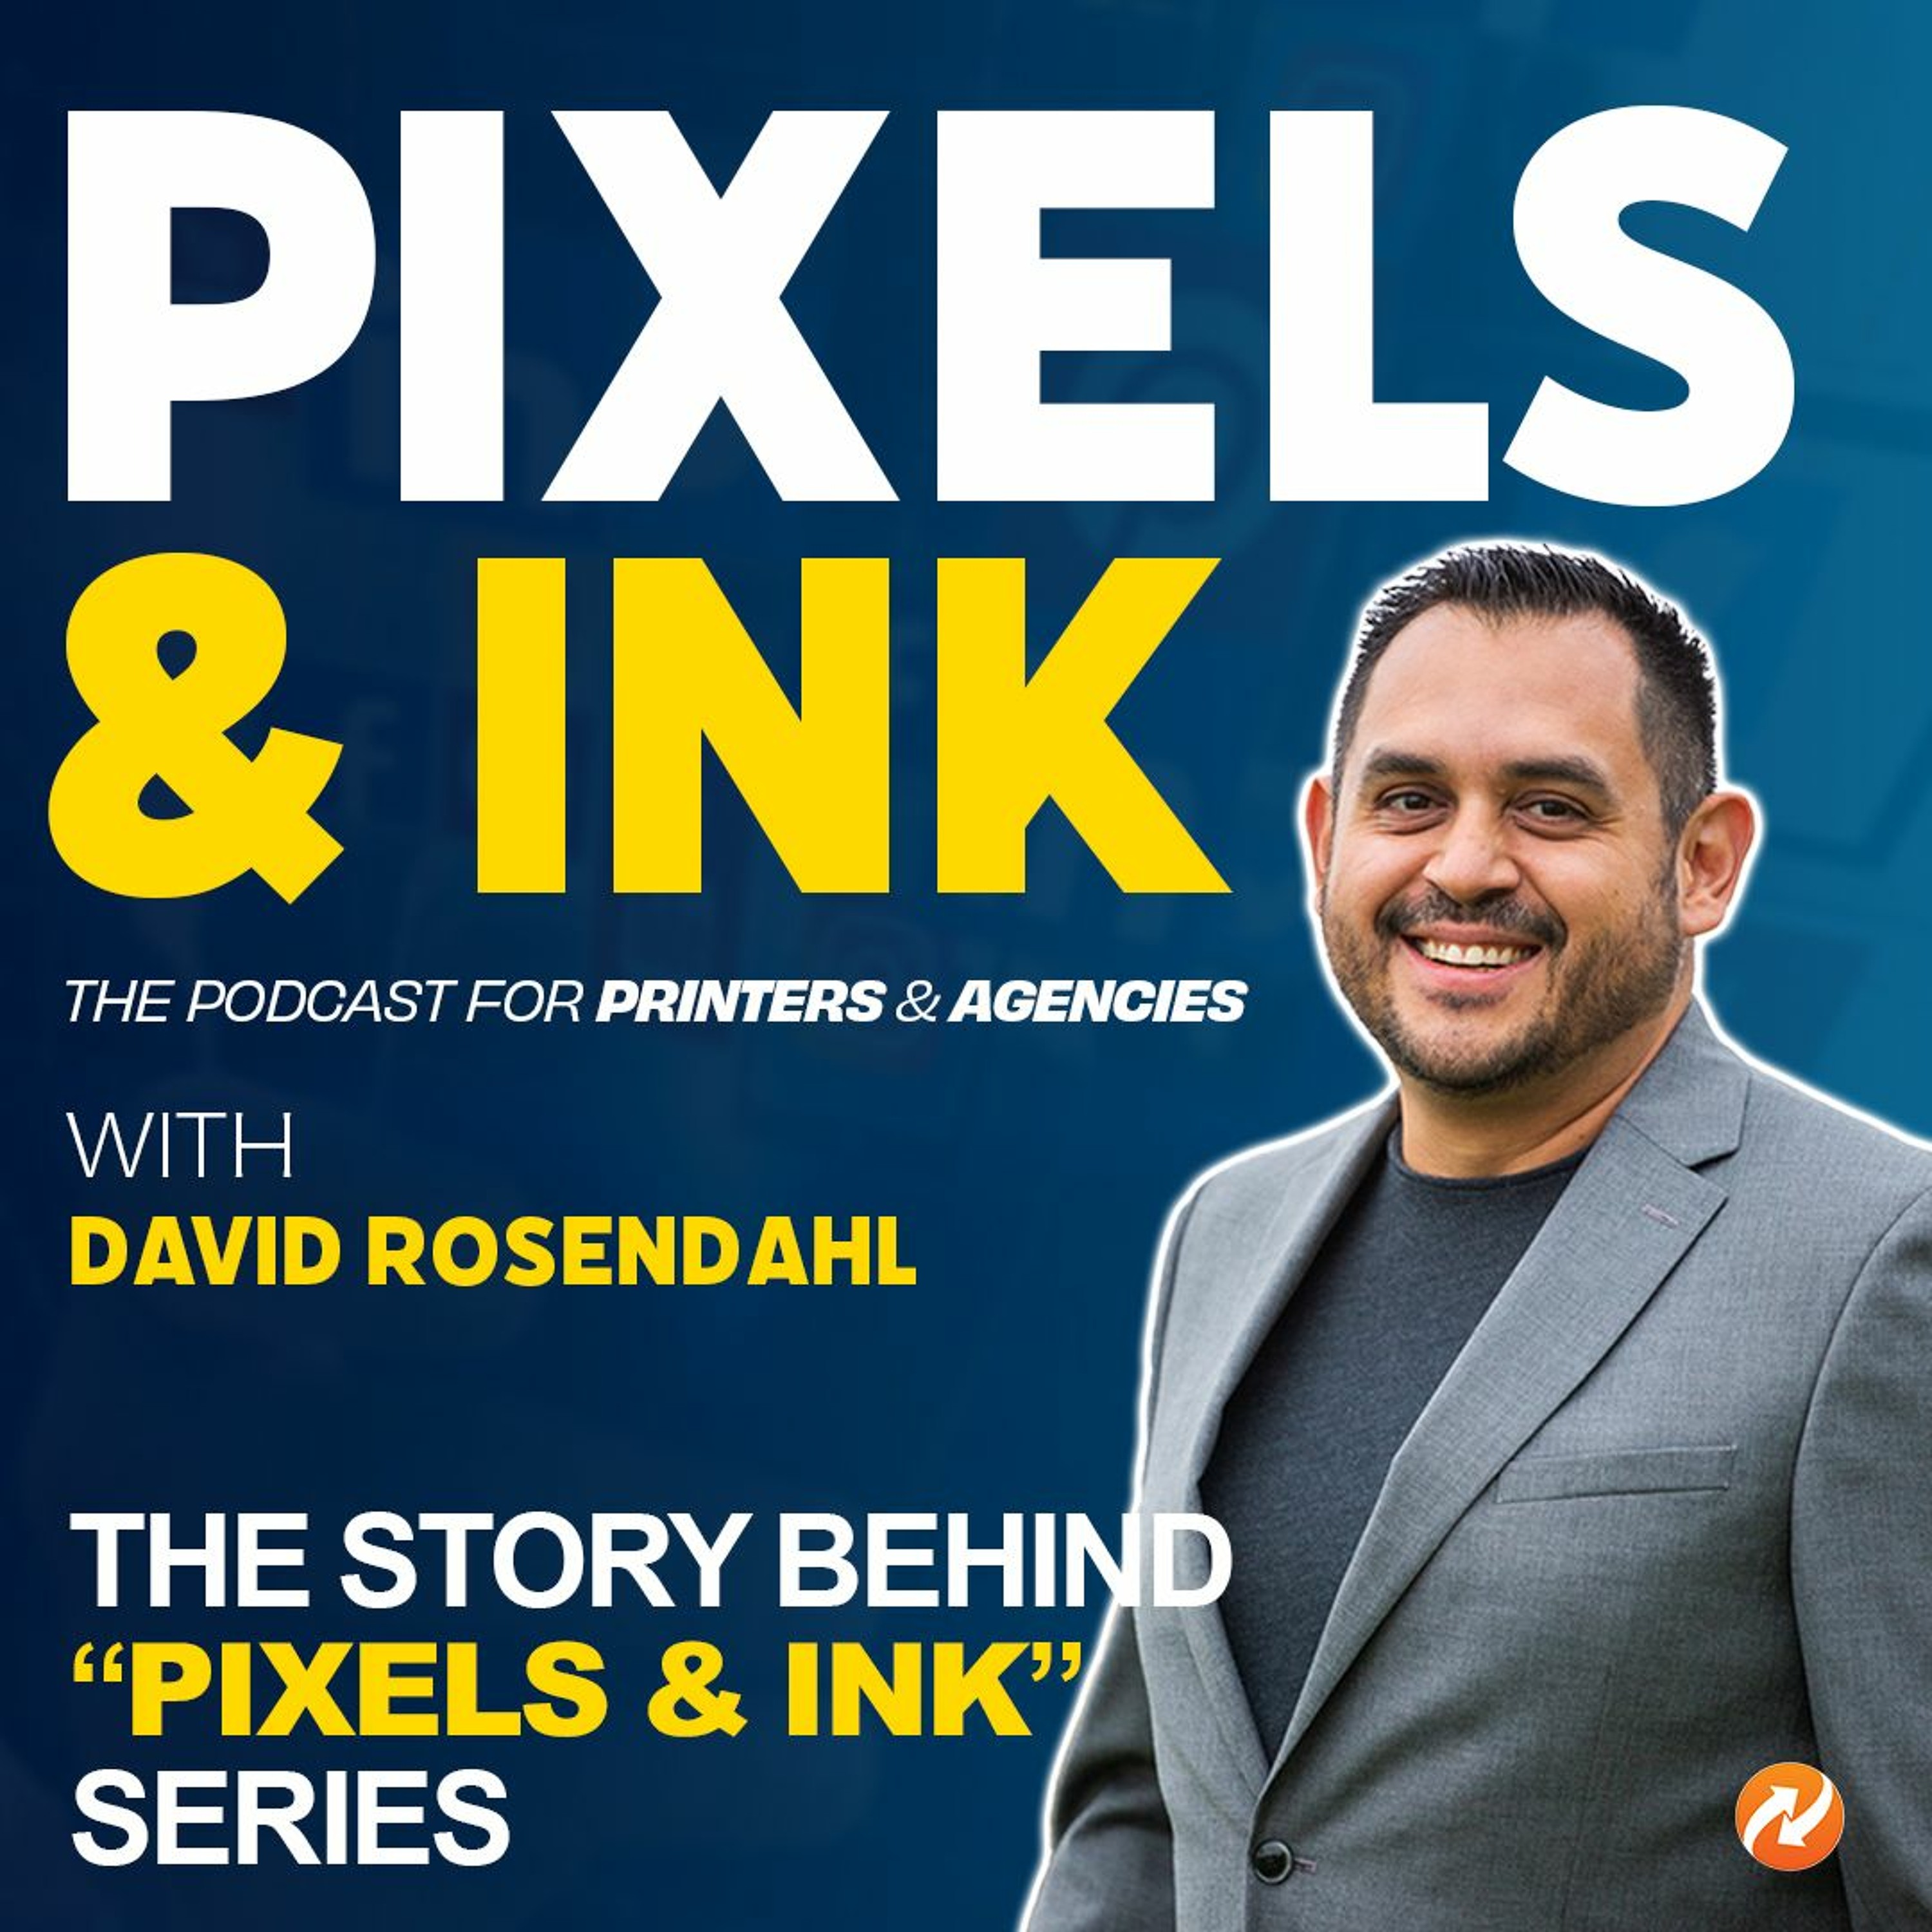 The Story Behind The ”Pixels & Ink” Series